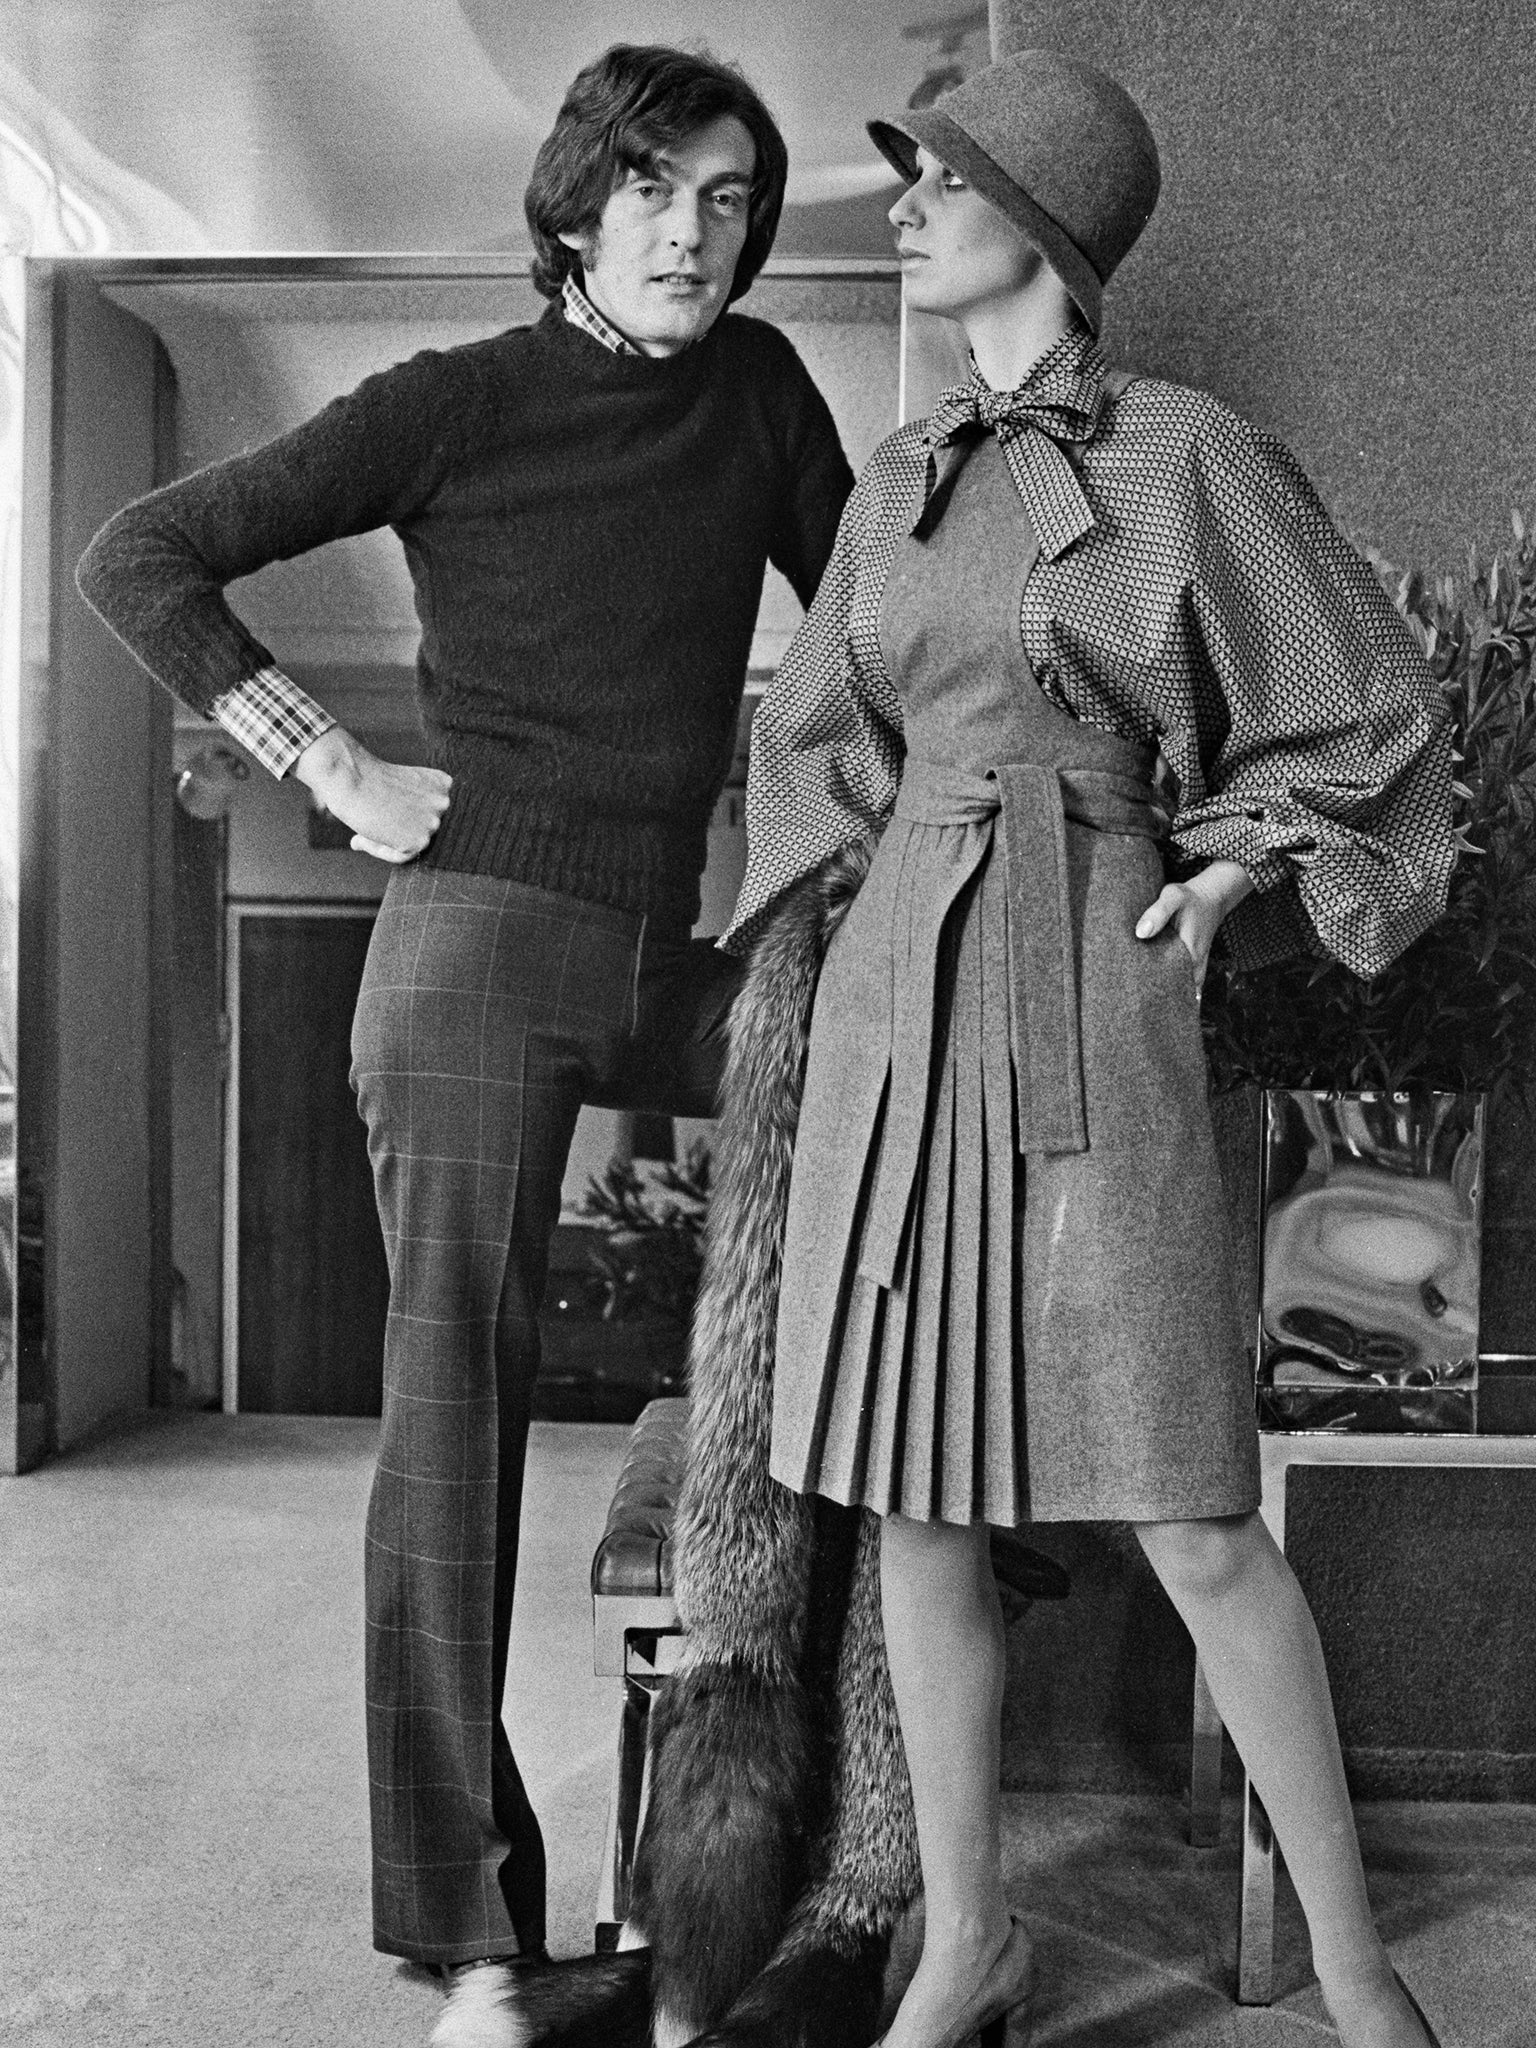 Bates with a model wearing one of his designs in 1973